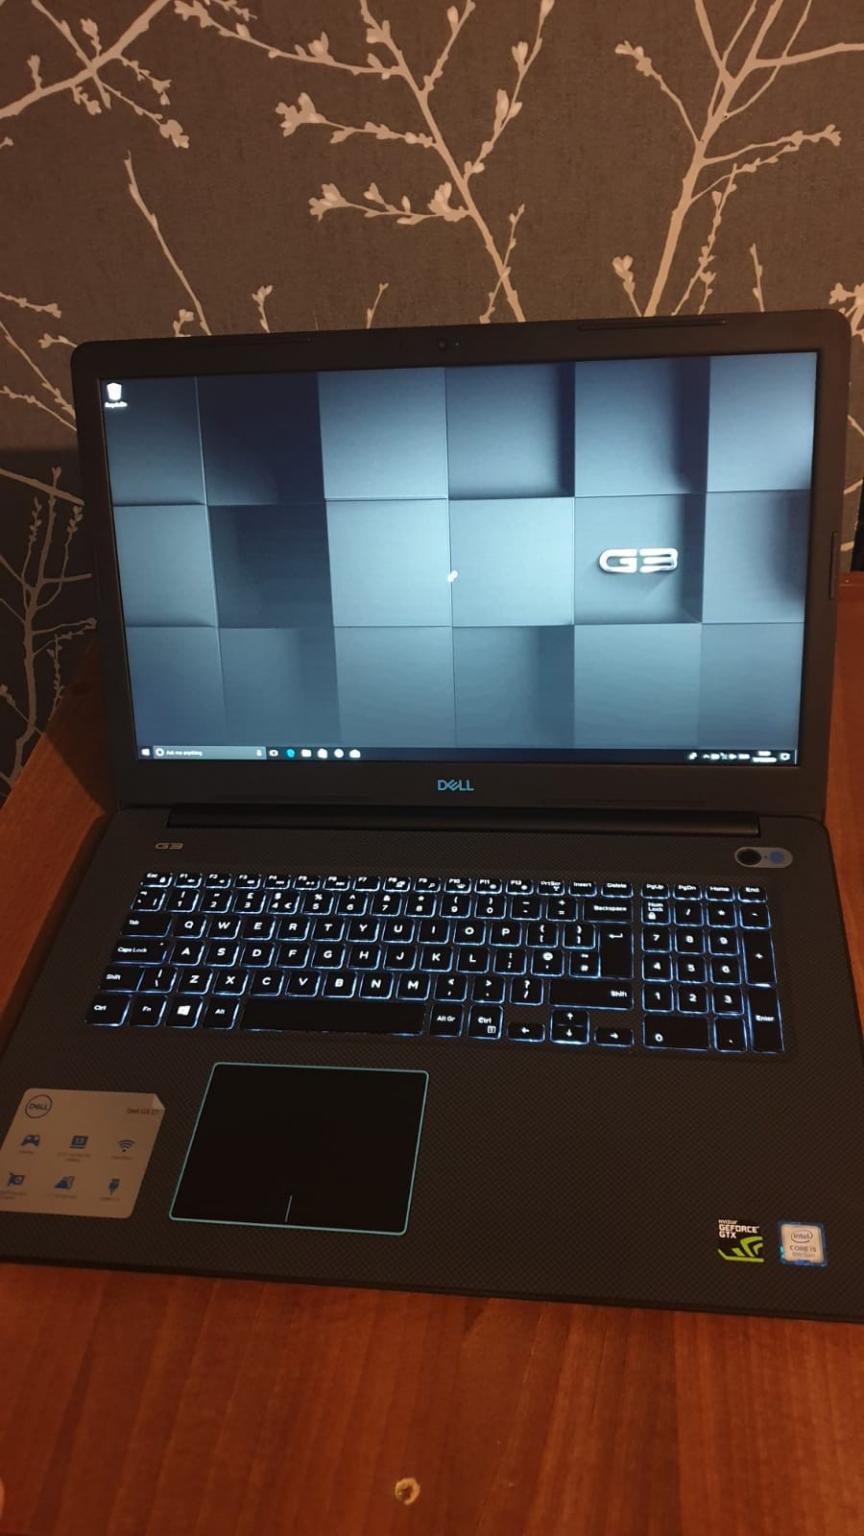 Dell G3 3779 Gaming laptop, 17.3 inch screen in B68 Sandwell for £550.00 for sale Shpock